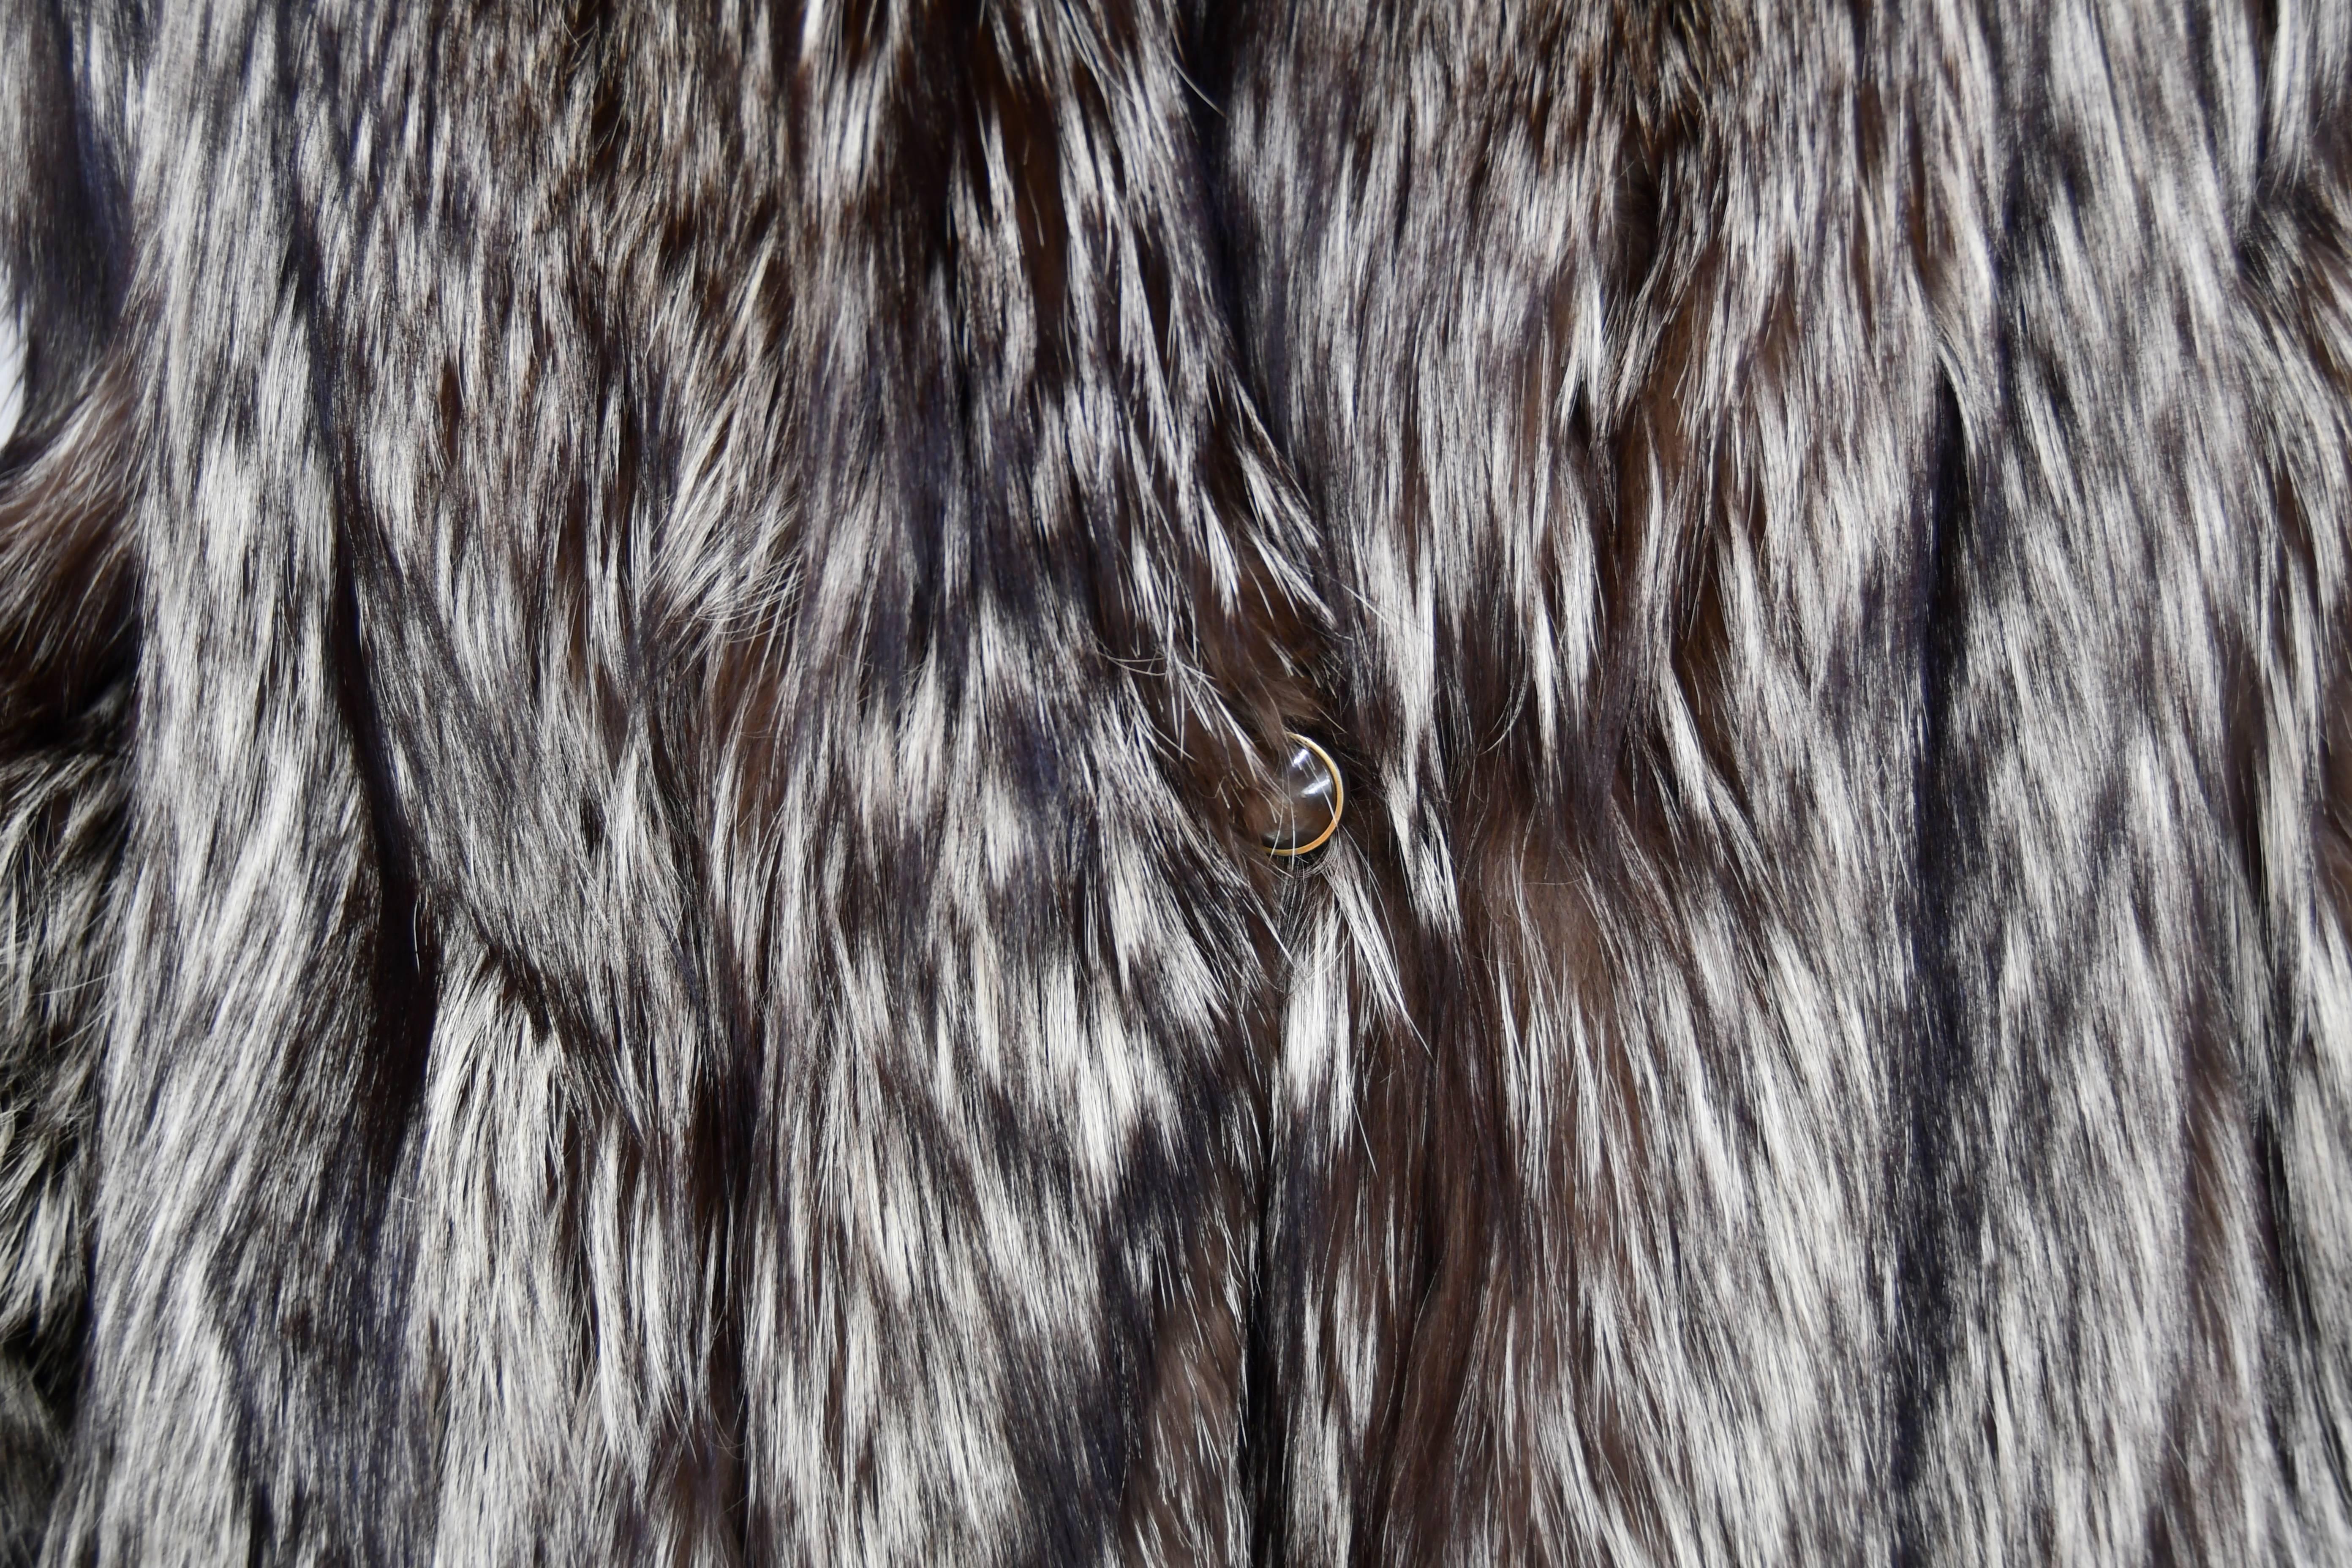 Silver Fox Fur Coat genuine high quality fur coat with rich and beautiful long hair.  Wearing this coat will be the essence of sophistication.  It has an lovely shawl collar wrapping you in an elegant designed Stroller style. Two slit side pockets